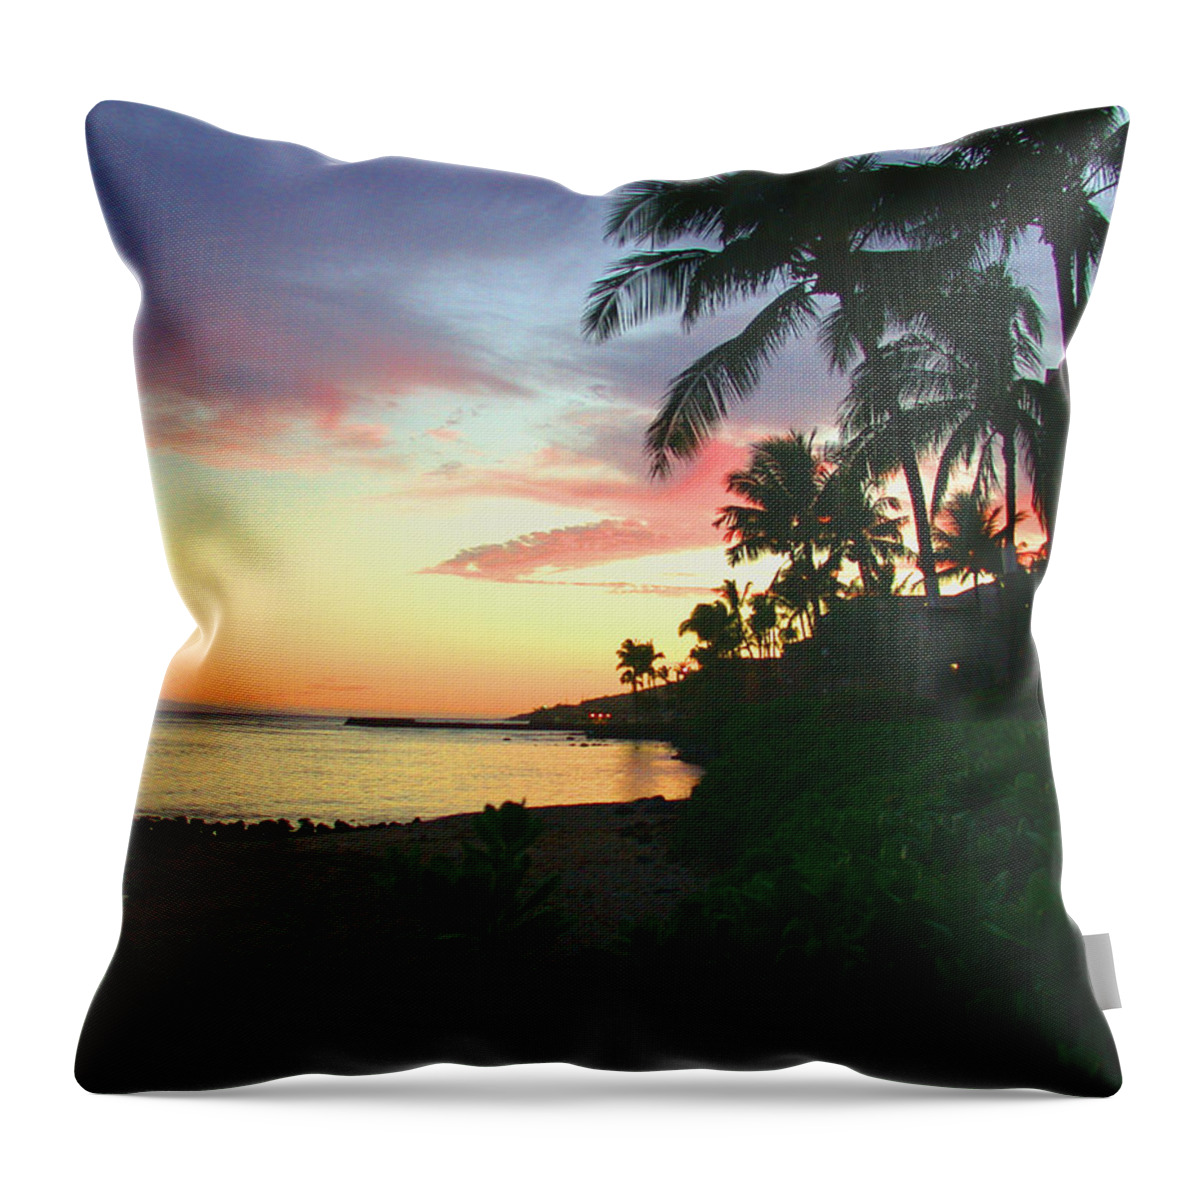 Sunset Throw Pillow featuring the photograph Island Sunset #2 by Angie Hamlin